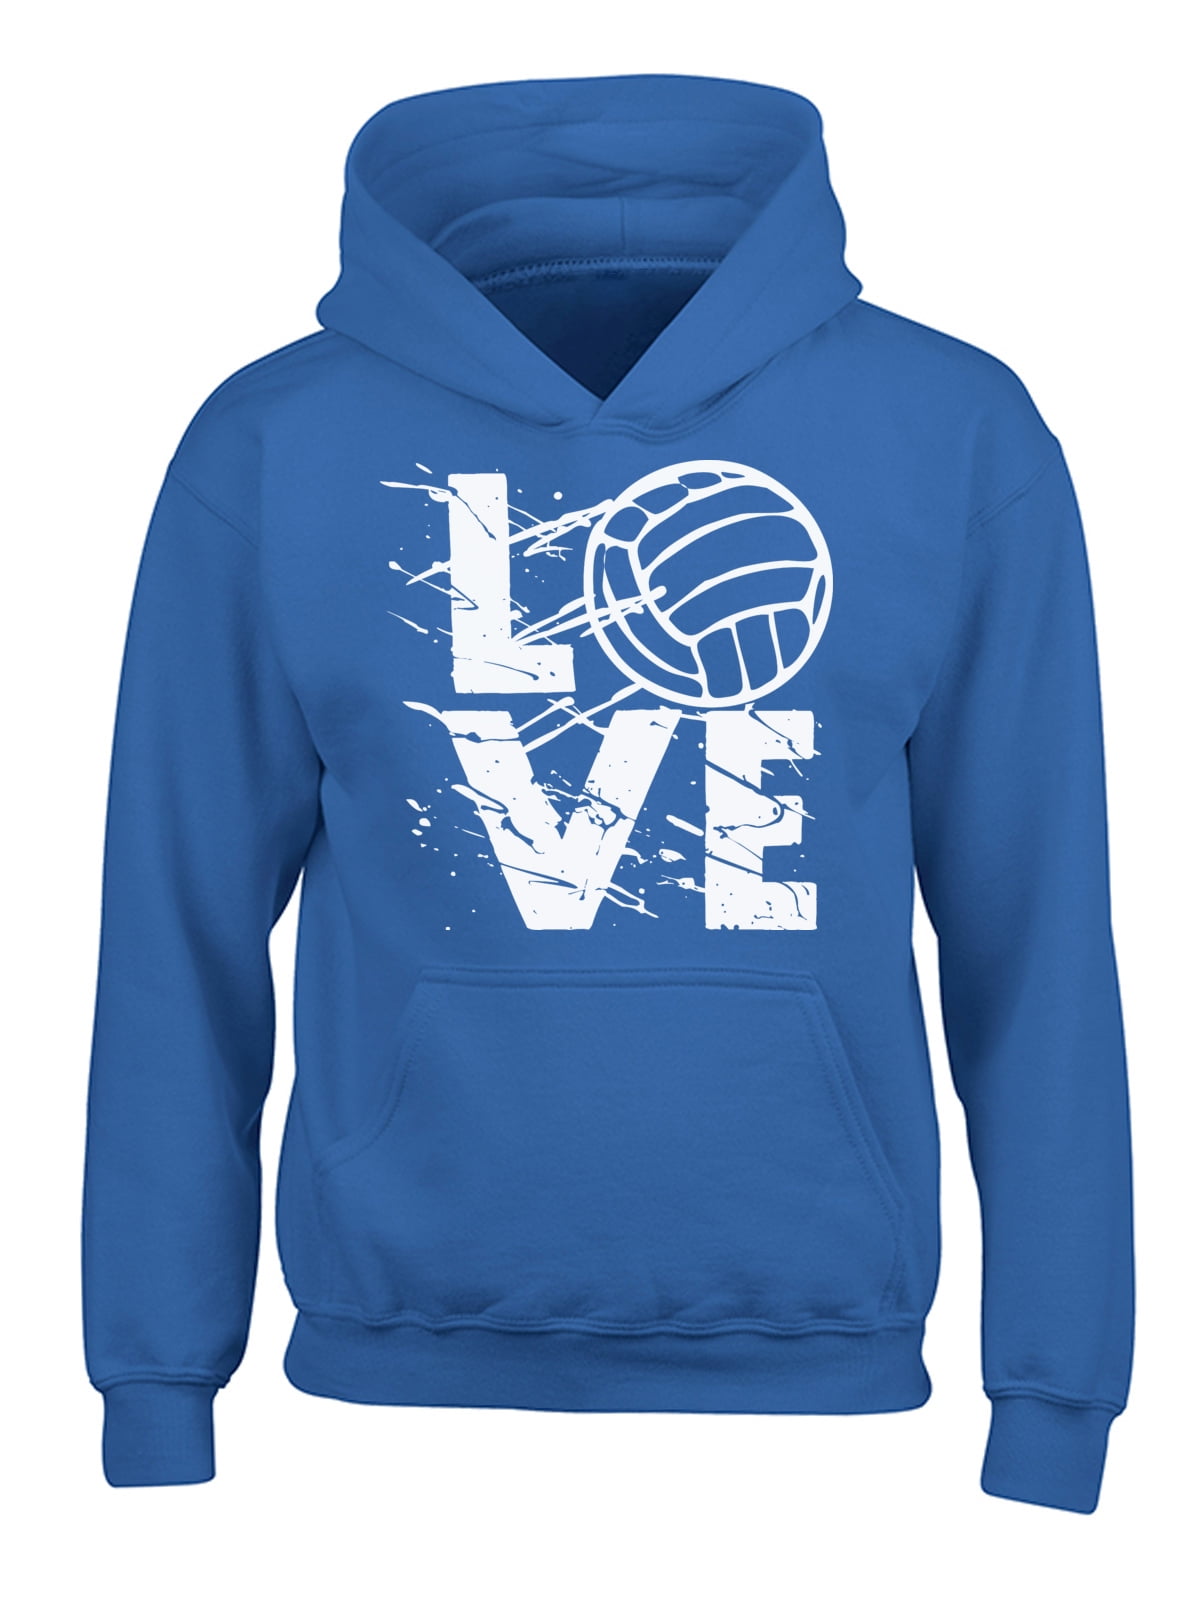 Awkward Styles Volleyball Hoodies for Kids Sport Lover Hooded Youth ...